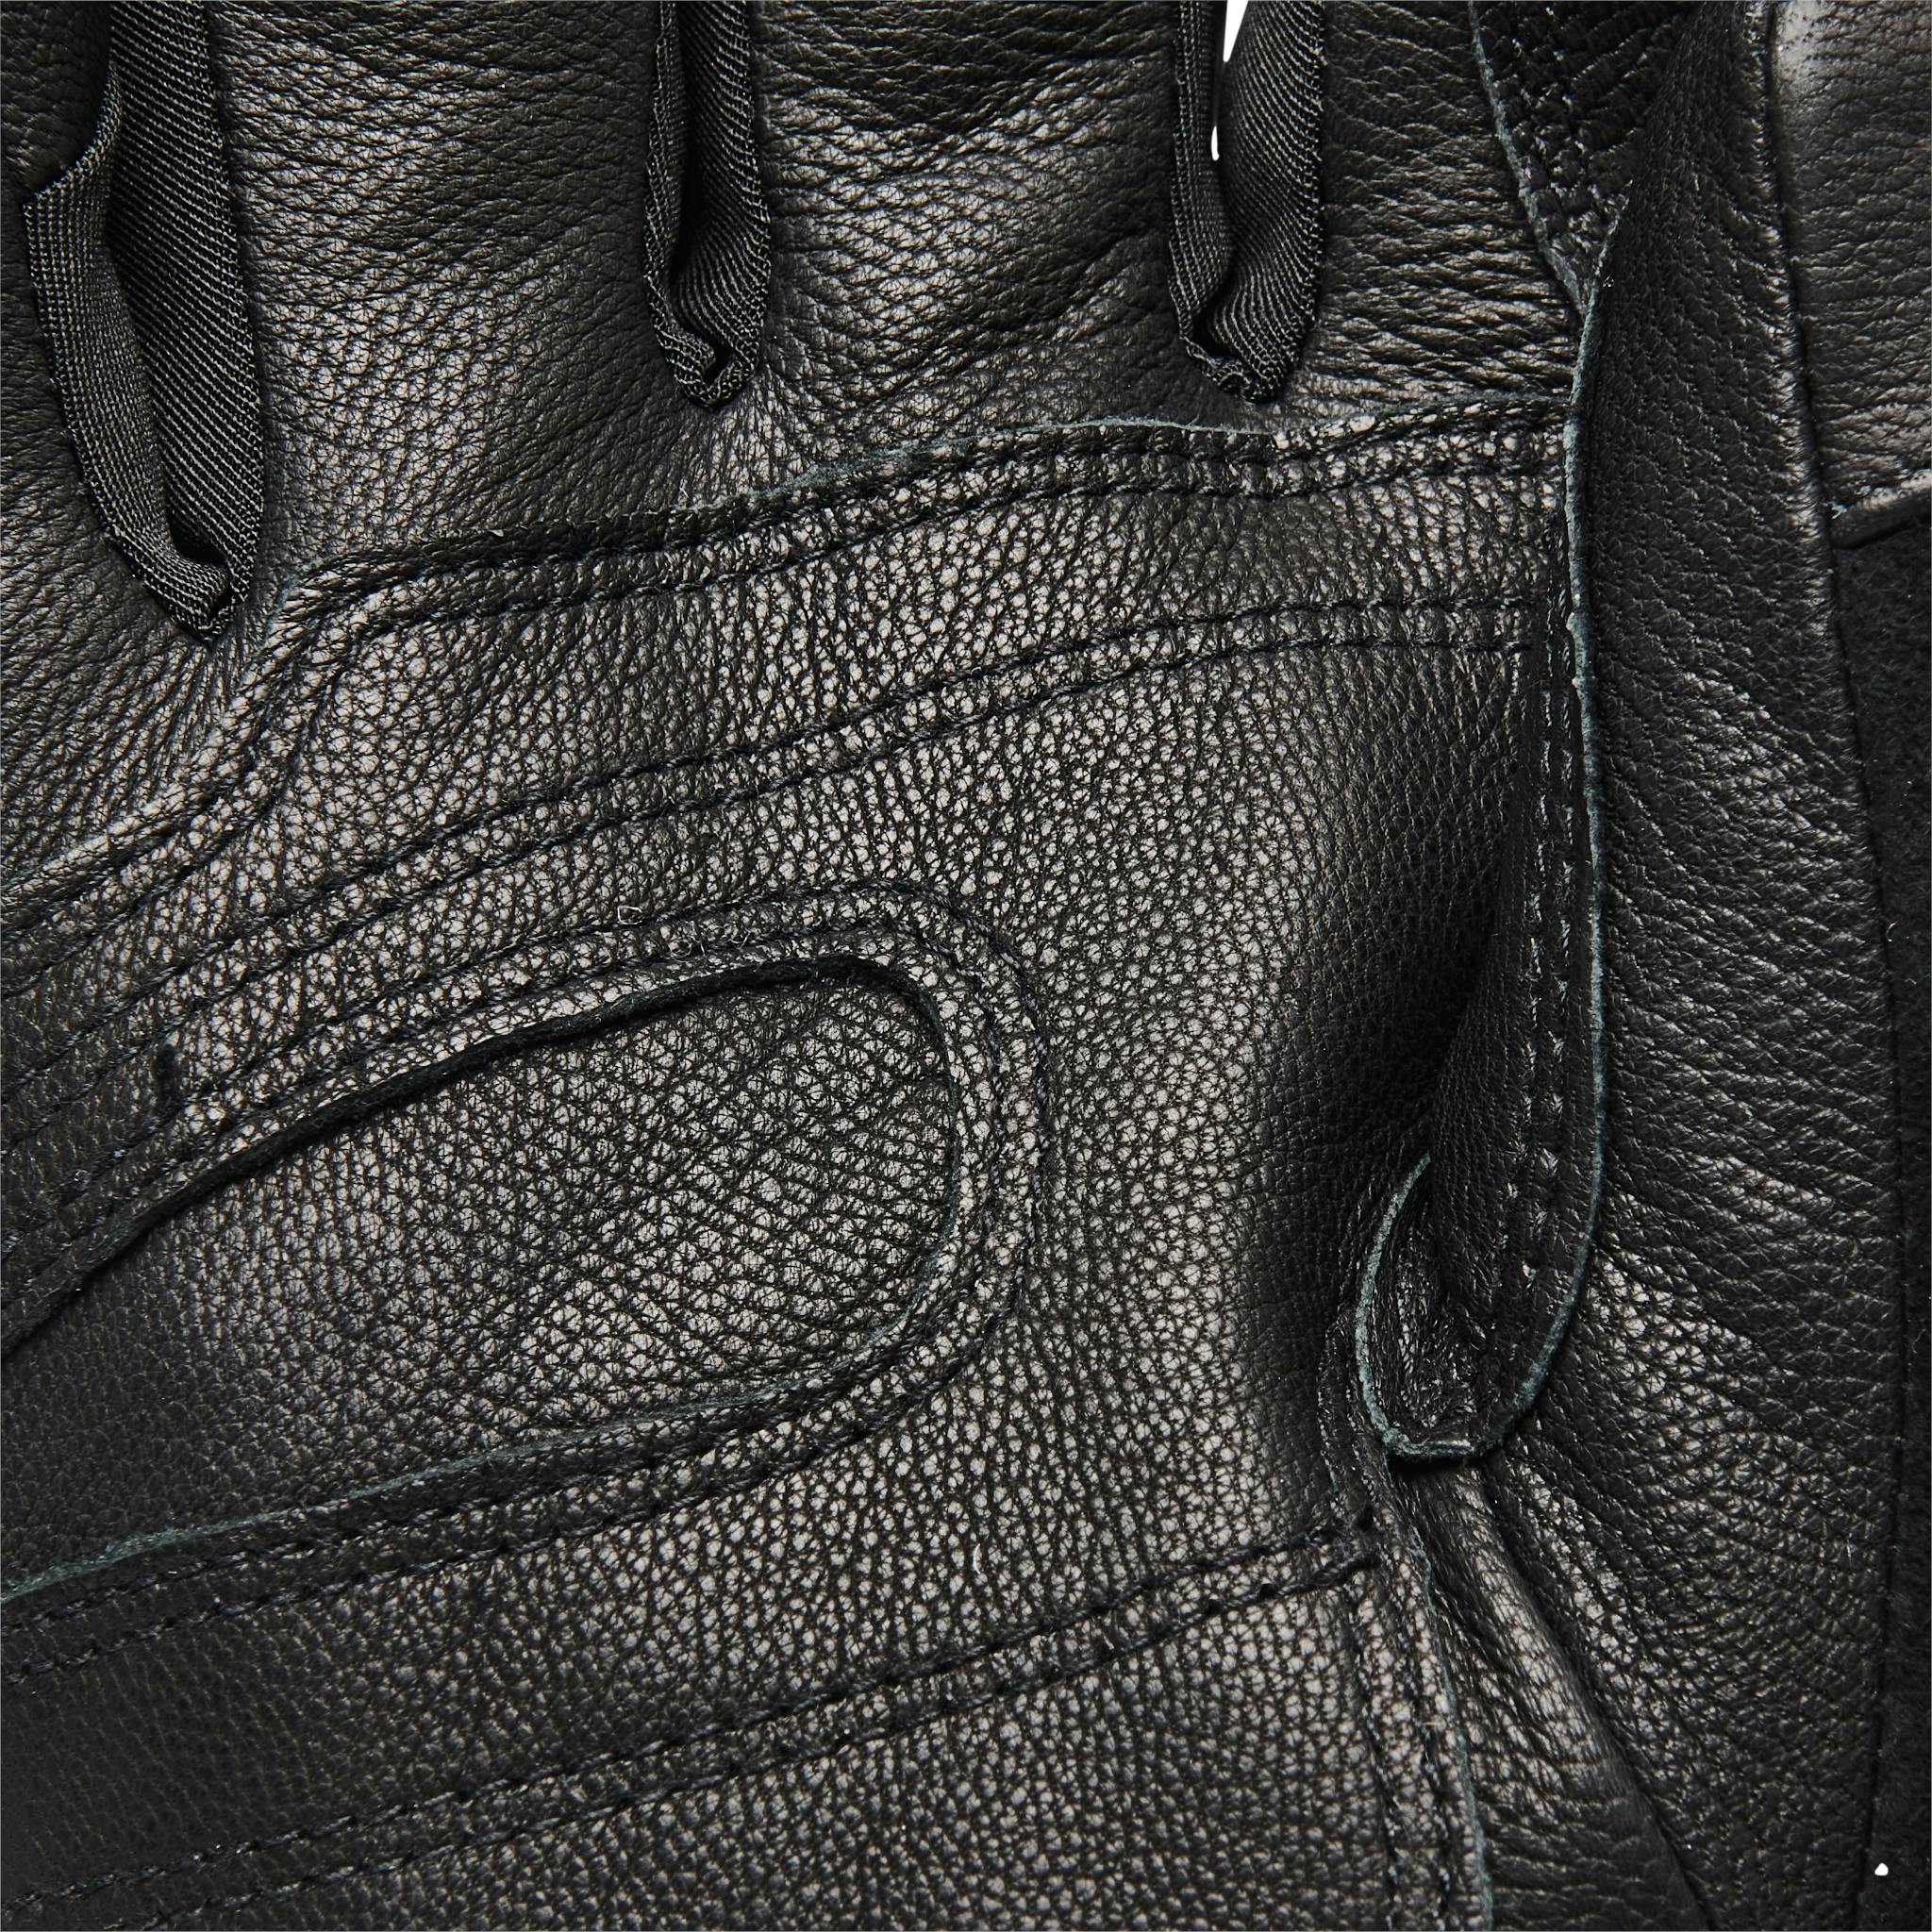 Detail shot of the leather palm